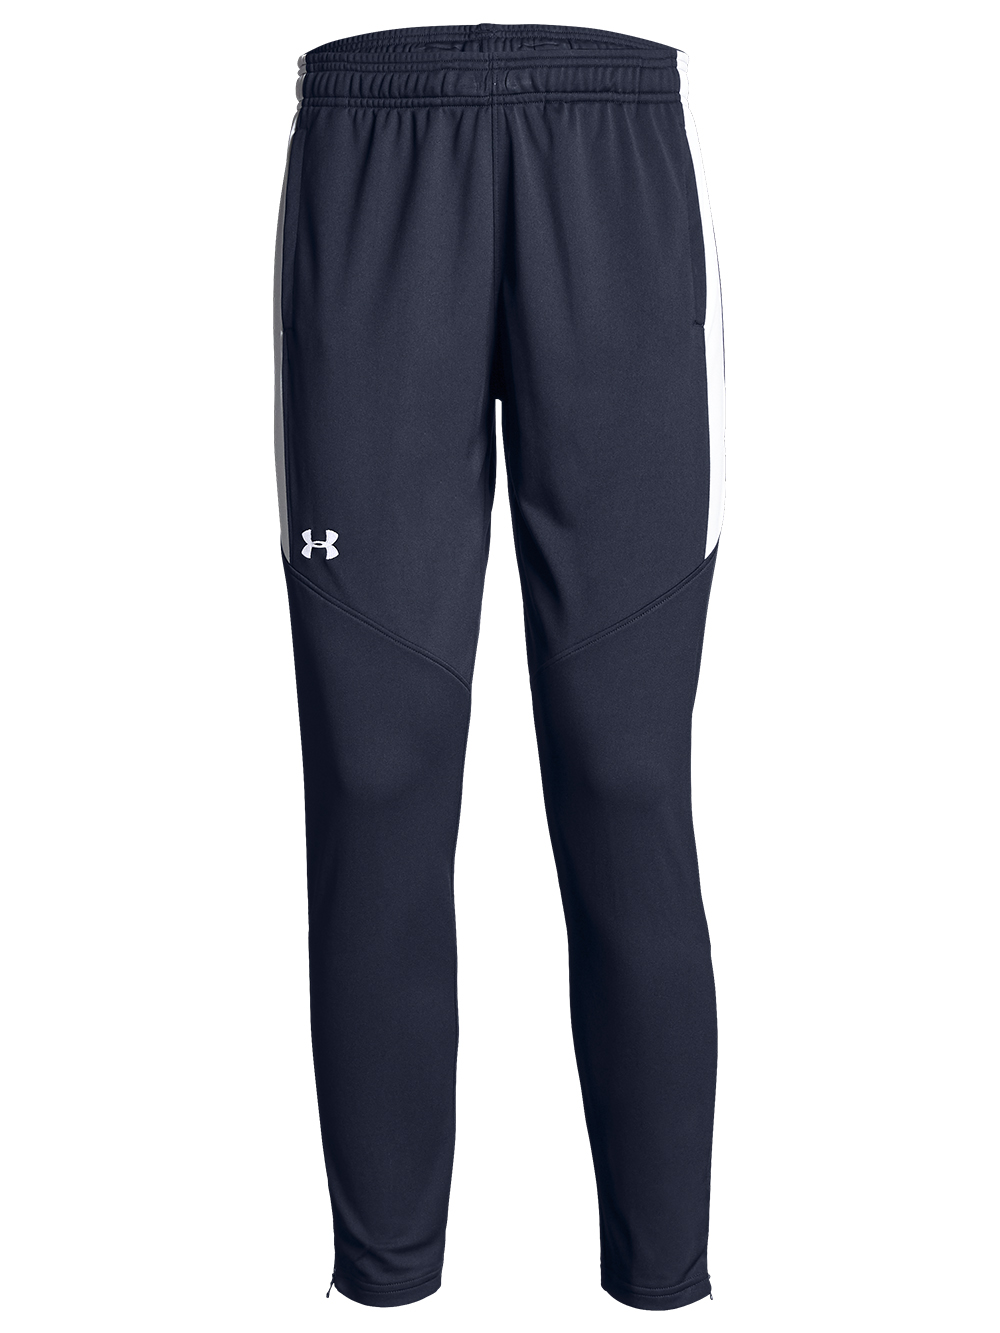 Under Armour Rival Knit Pants | Midwest Volleyball Warehouse